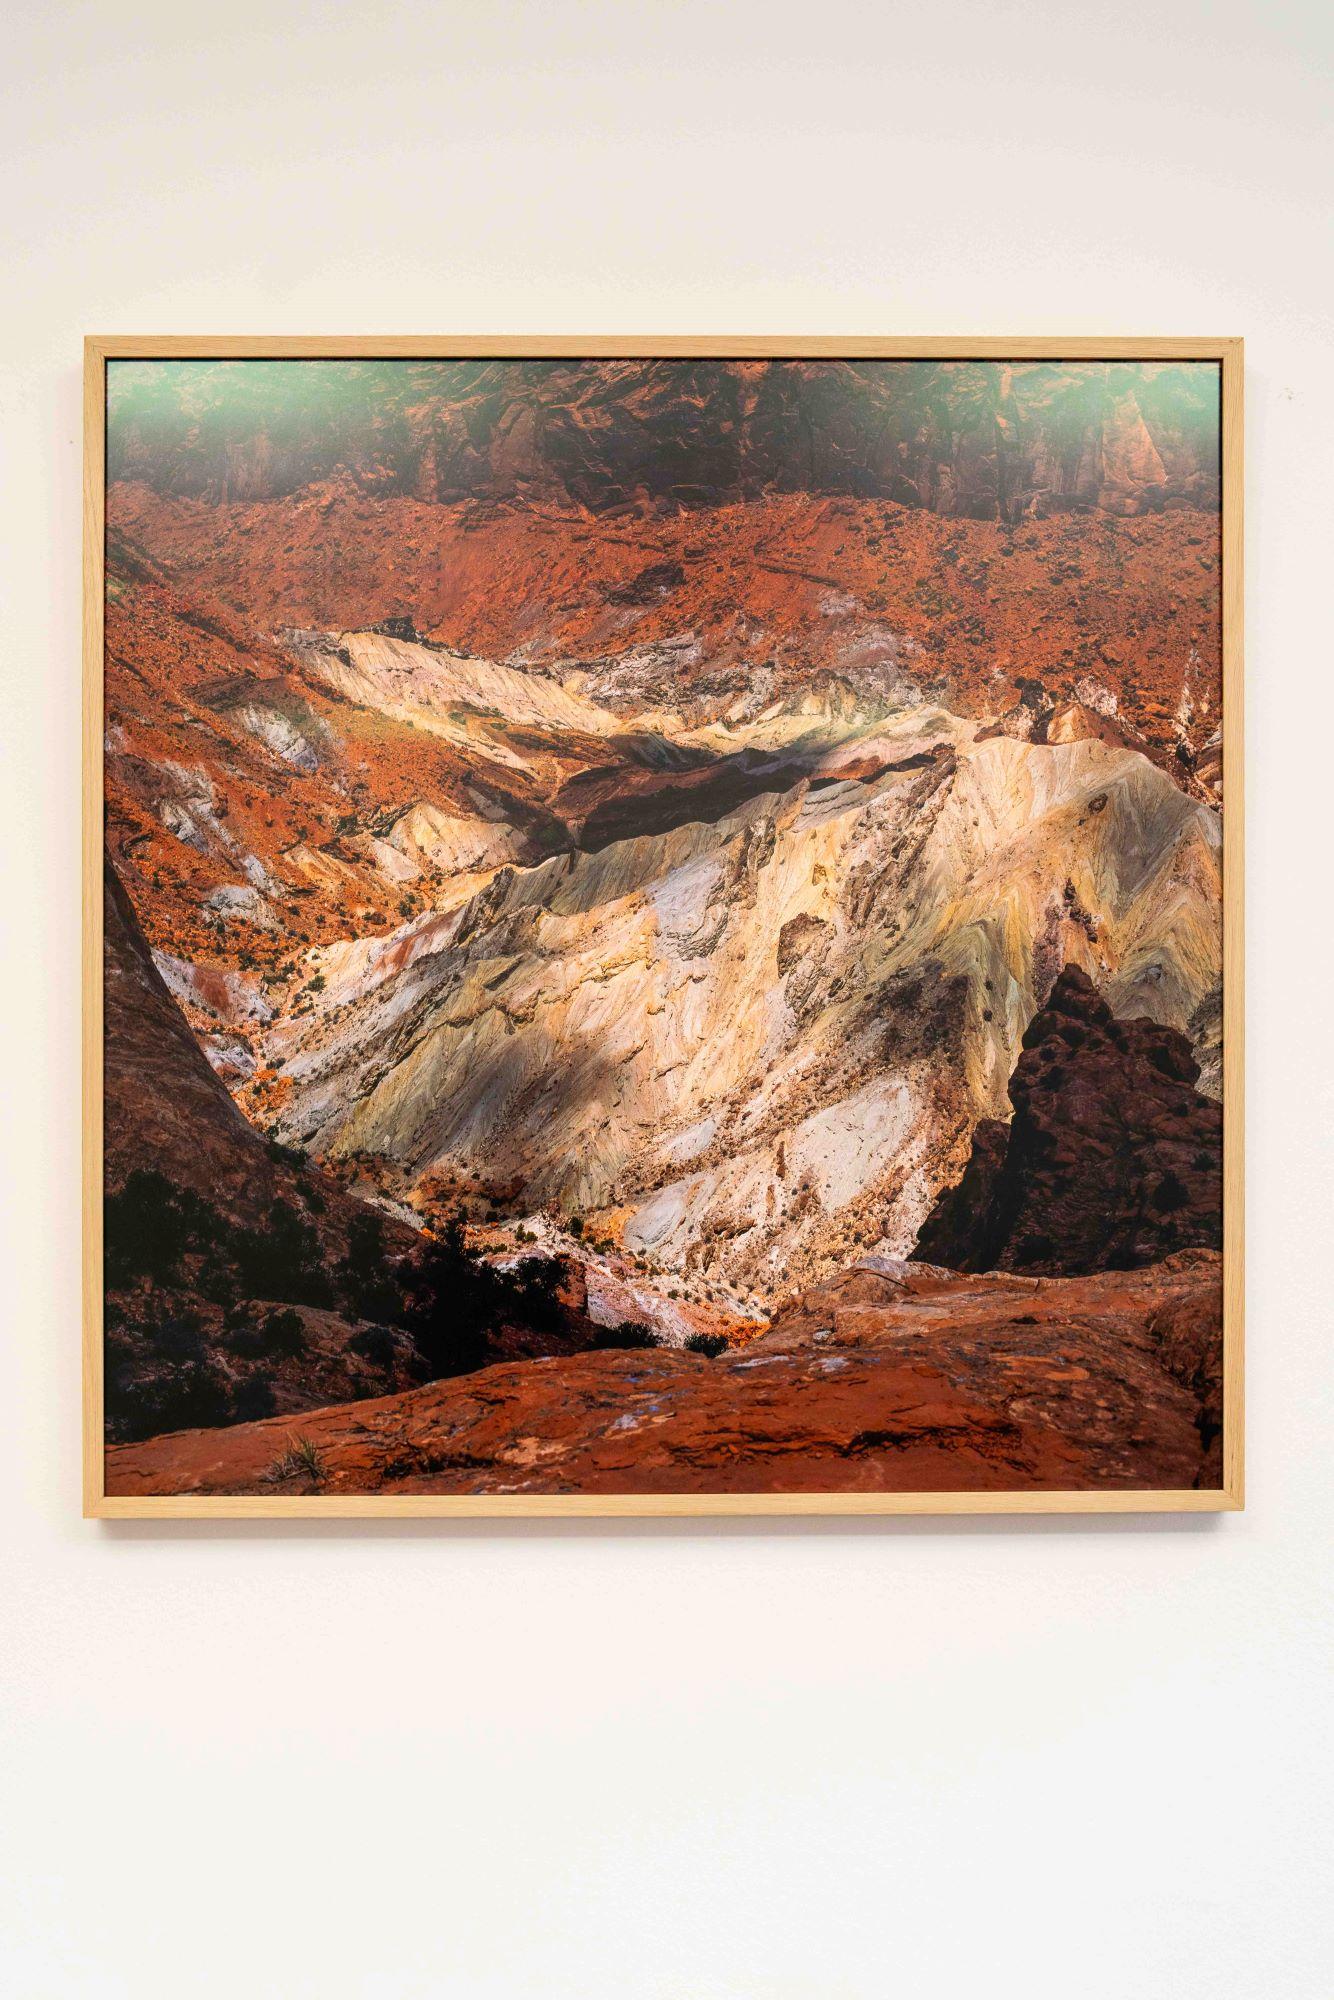 Crater by Luca Marziale - Contemporary landscape photograph, mountain, nature For Sale 2